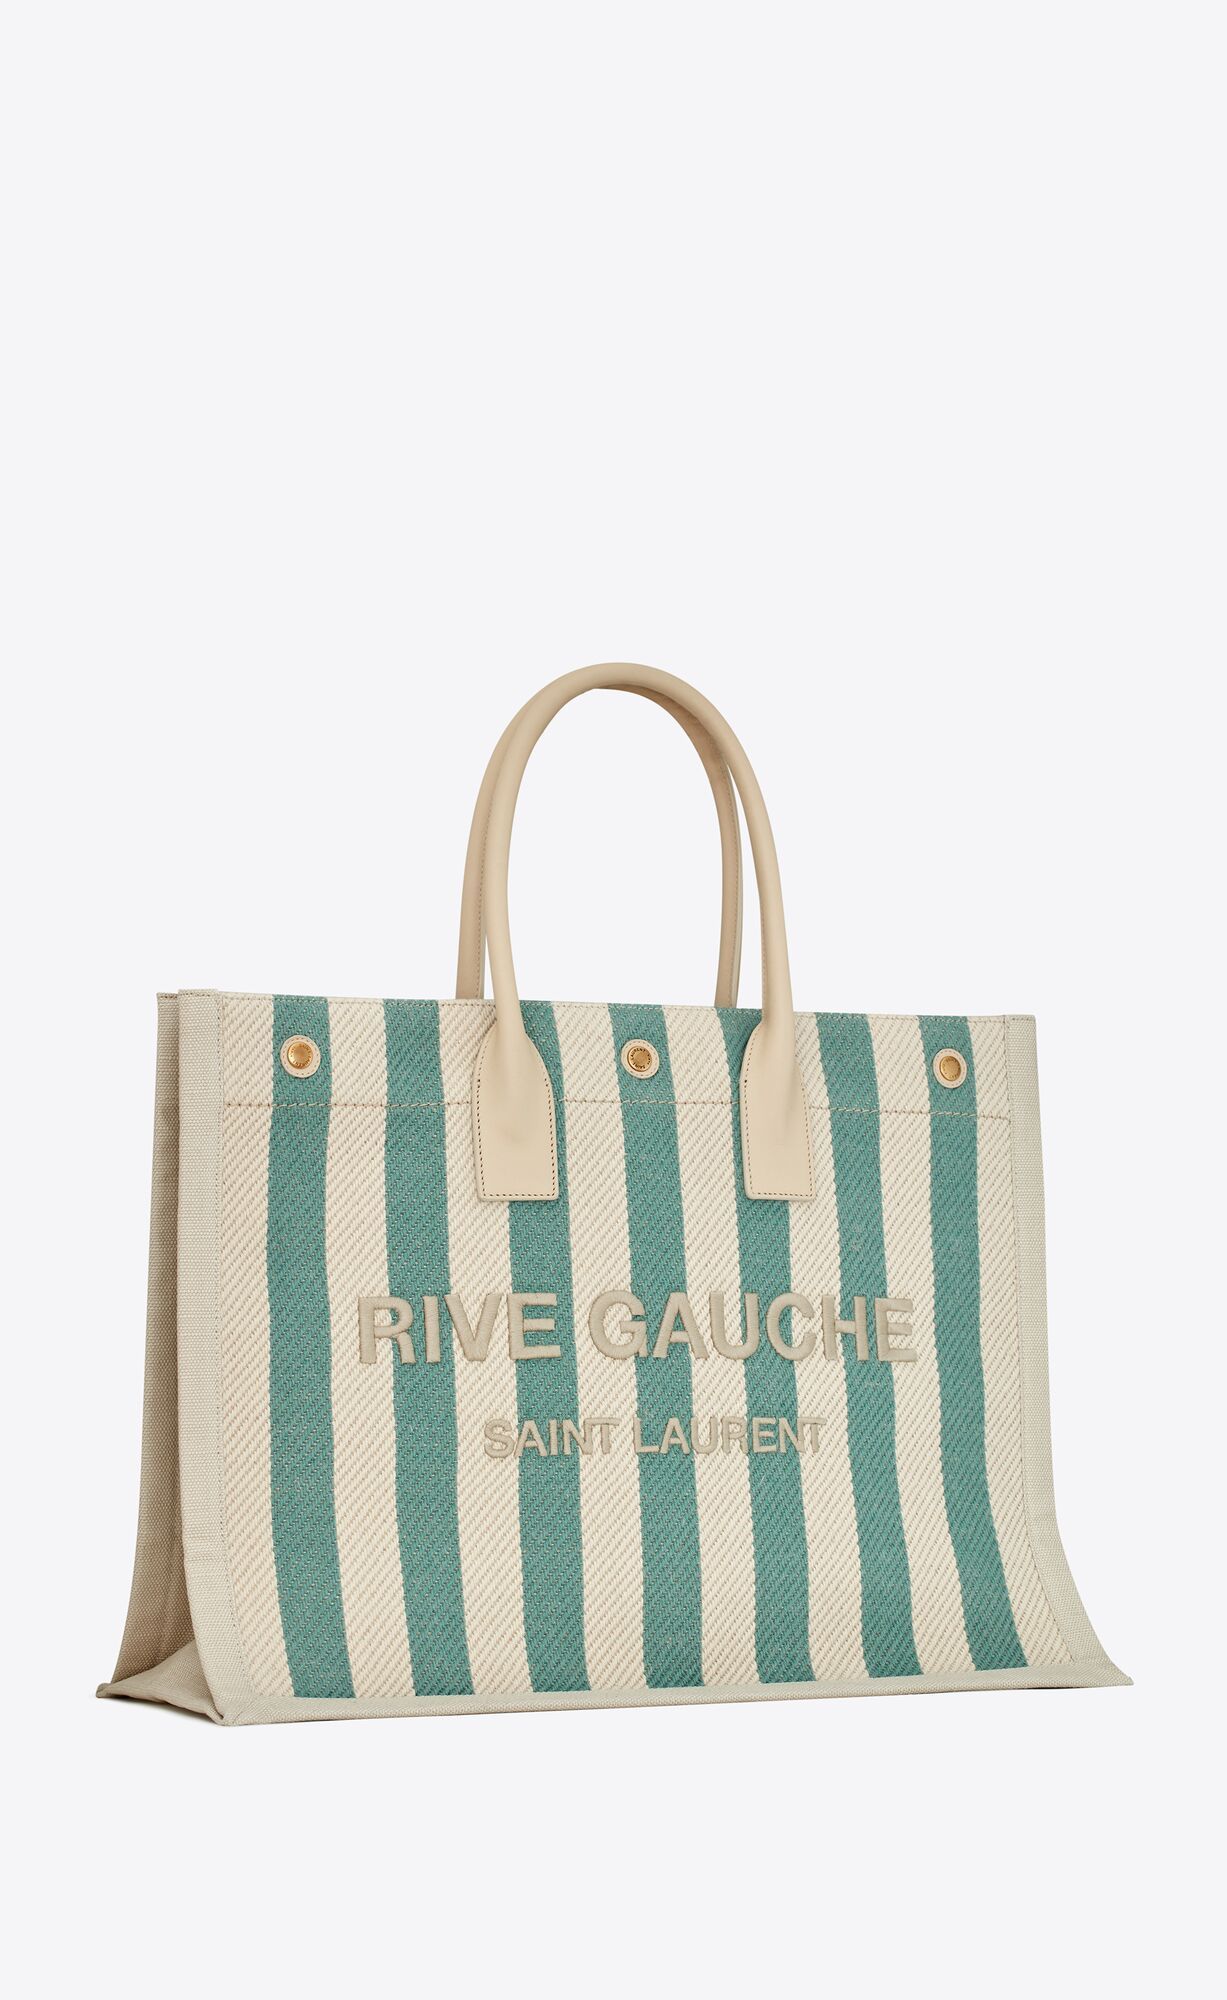 Rive Gauche tote bag in striped canvas and smooth leather | Saint Laurent | YSL.com | Saint Laurent Inc. (Global)